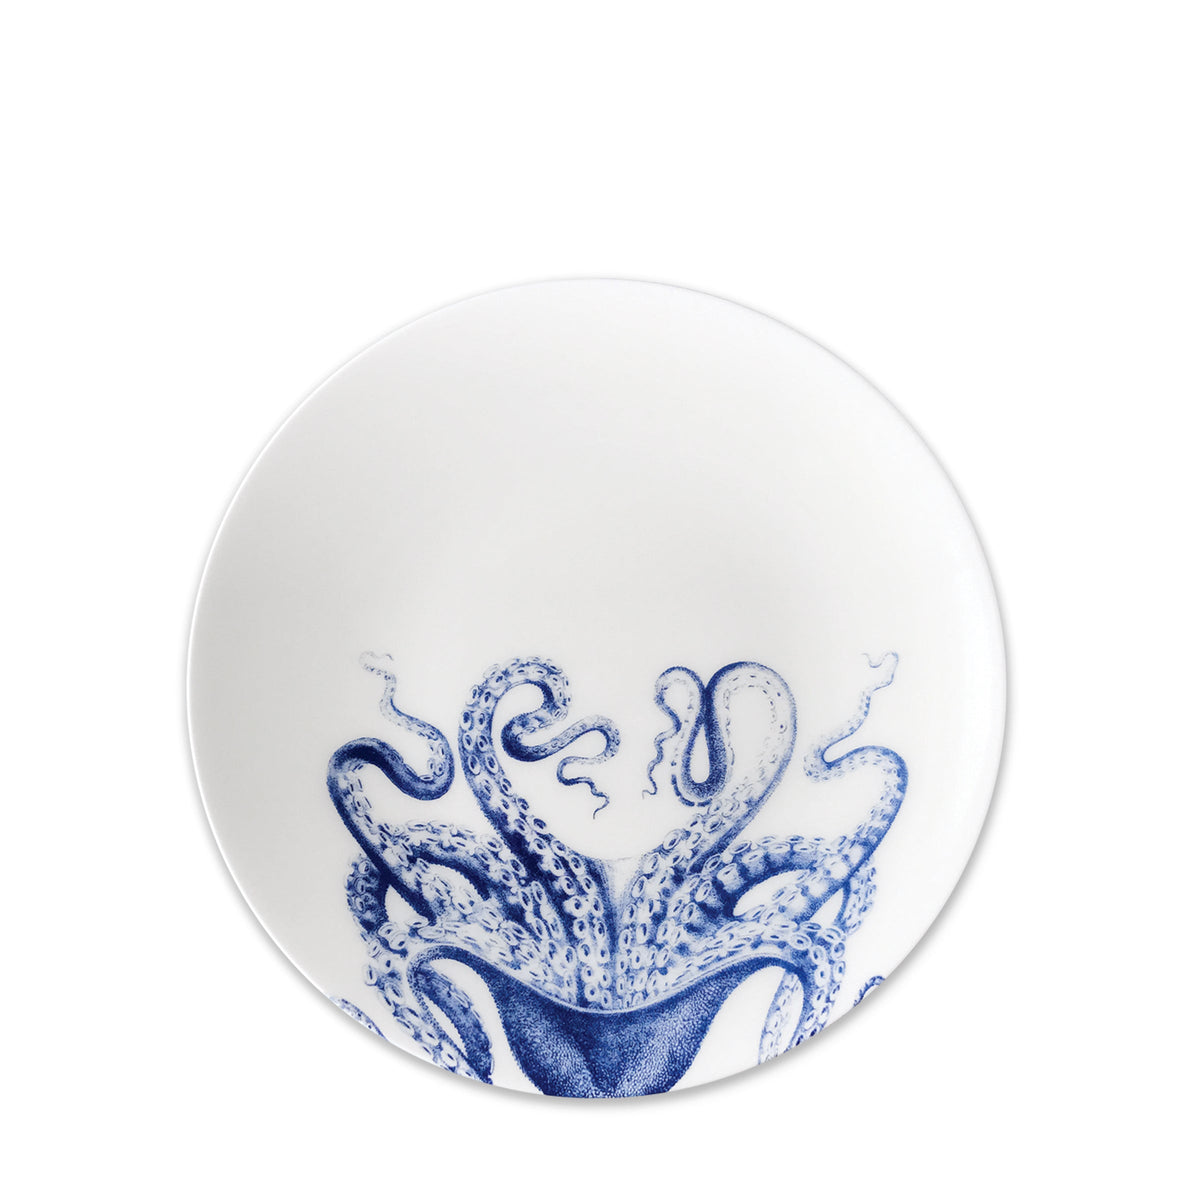 A white **Lucy Coupe Salad Plate** with a detailed blue illustration of an octopus at the bottom, crafted from creamy white premium porcelain. Its contemporary shape adds a modern touch, and it&#39;s both dishwasher and microwave safe for added convenience from **Caskata Artisanal Home**.